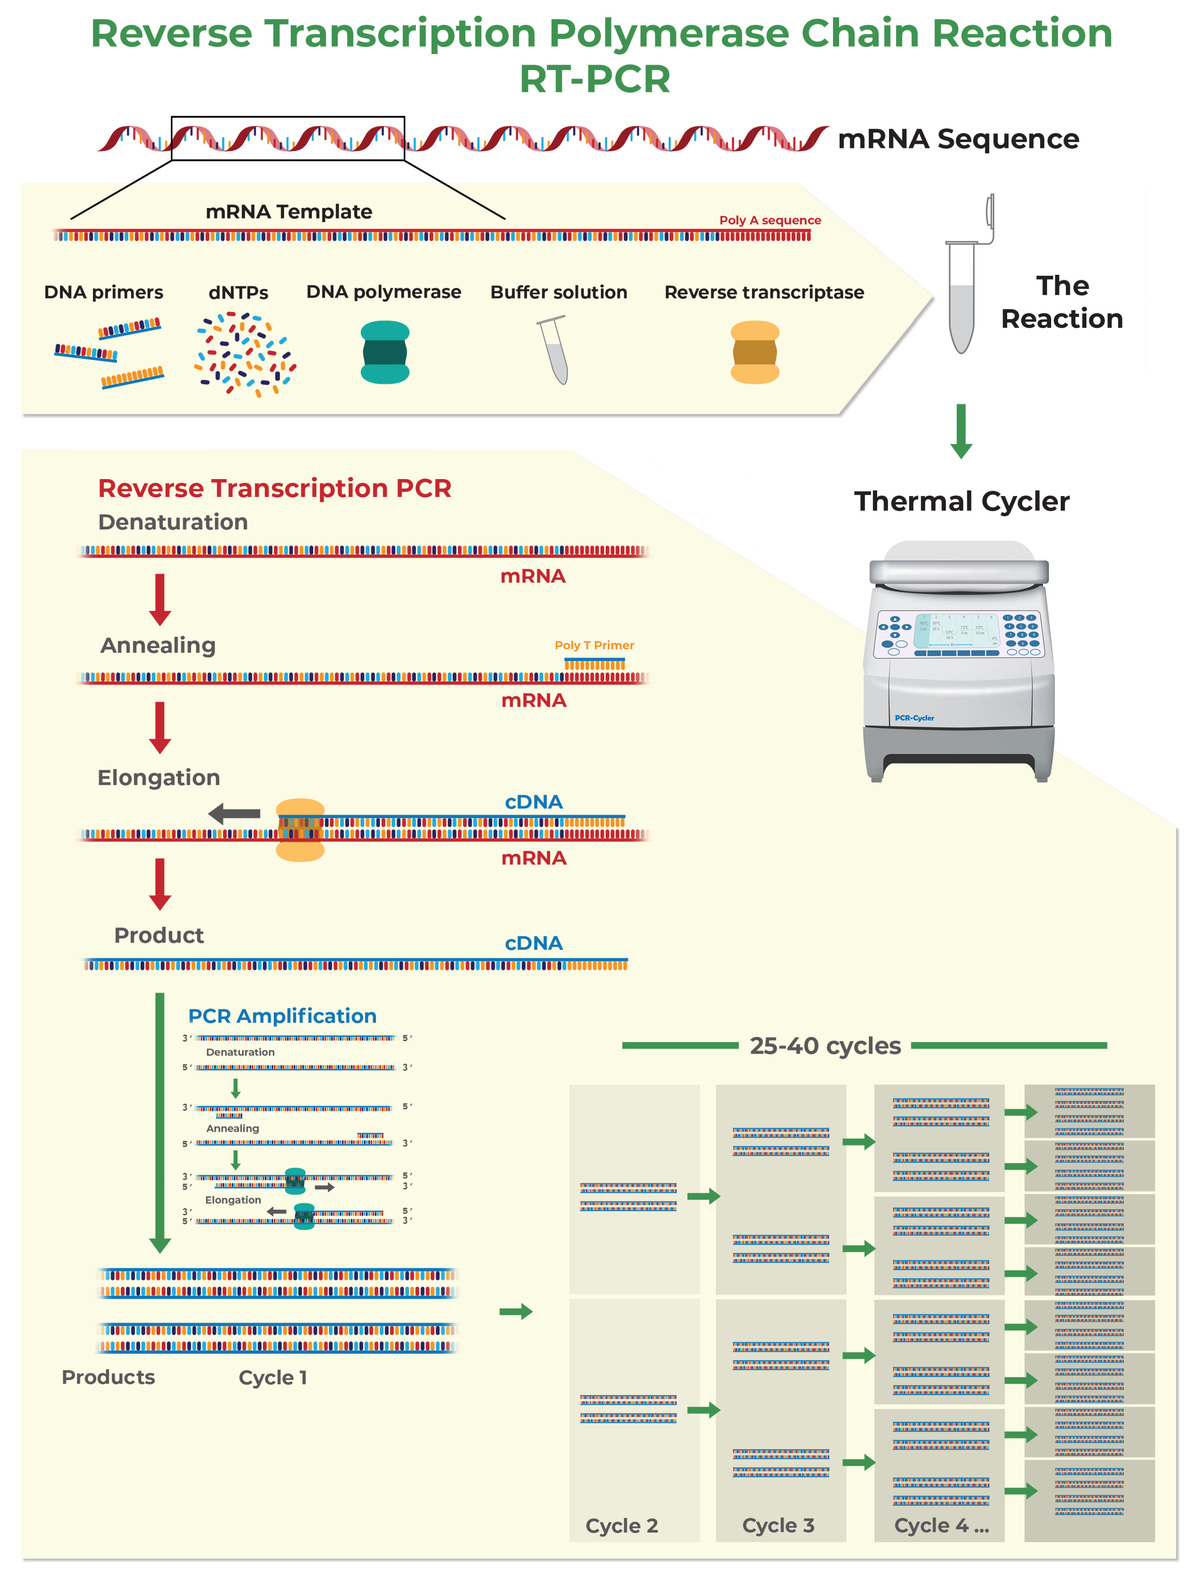 RT-qPCR begins with a reverse transcription step that converts mRNA to cDNA using a reverse transcriptase enzyme. After the mRNA is converted to cDNA, the PCR reaction proceeds with cycles of denaturation, annealing, and extension to amplify the target region.